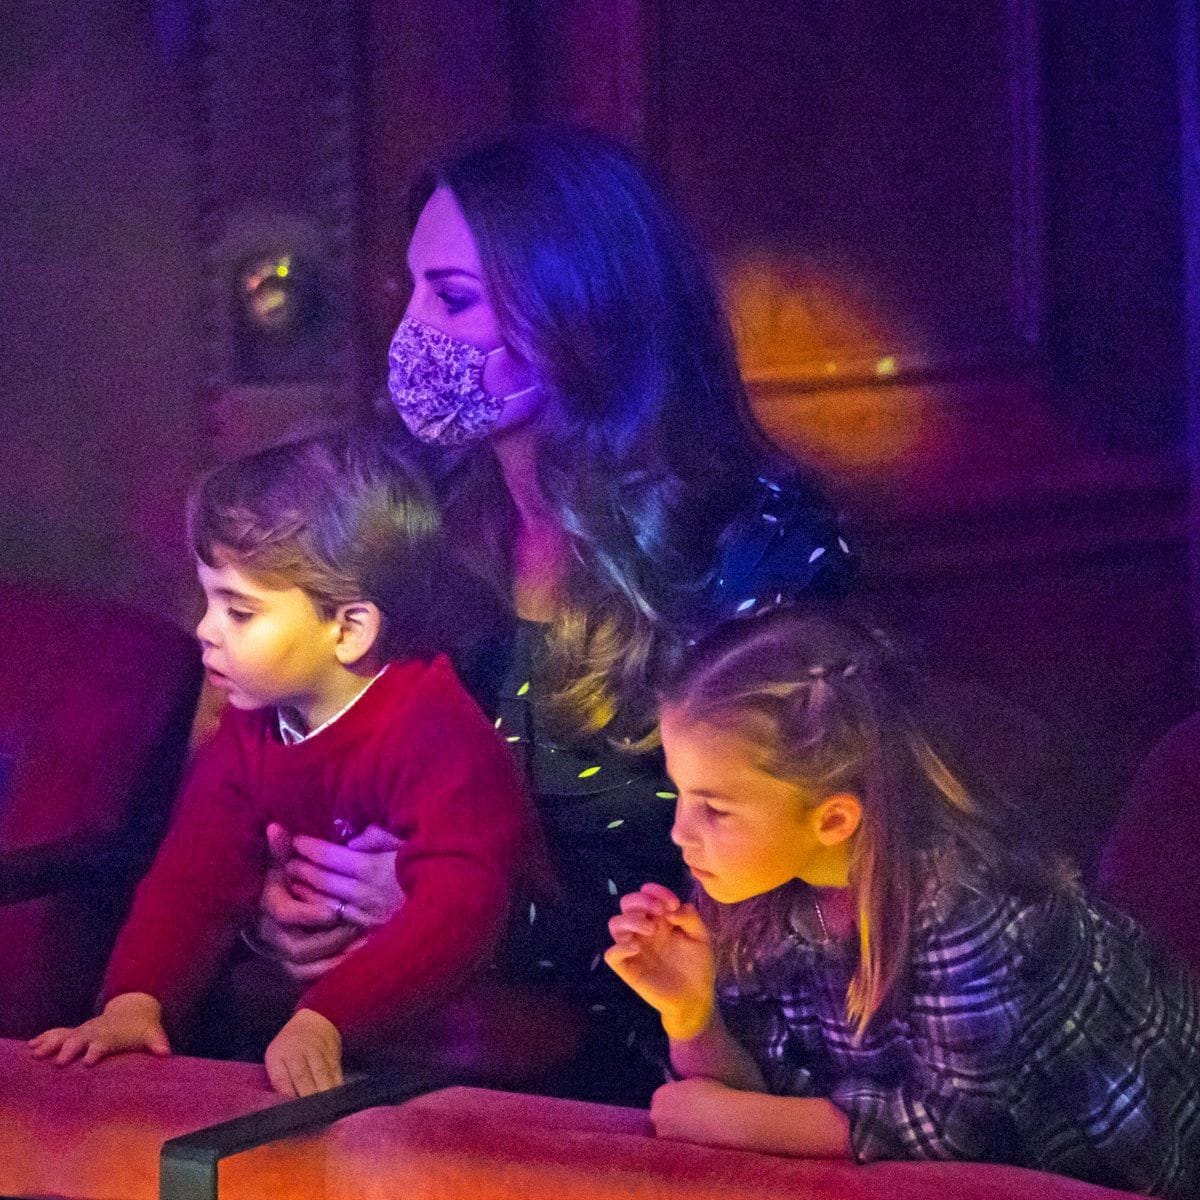 Charlotte and her little brother were engrossed by what was happening on stage.